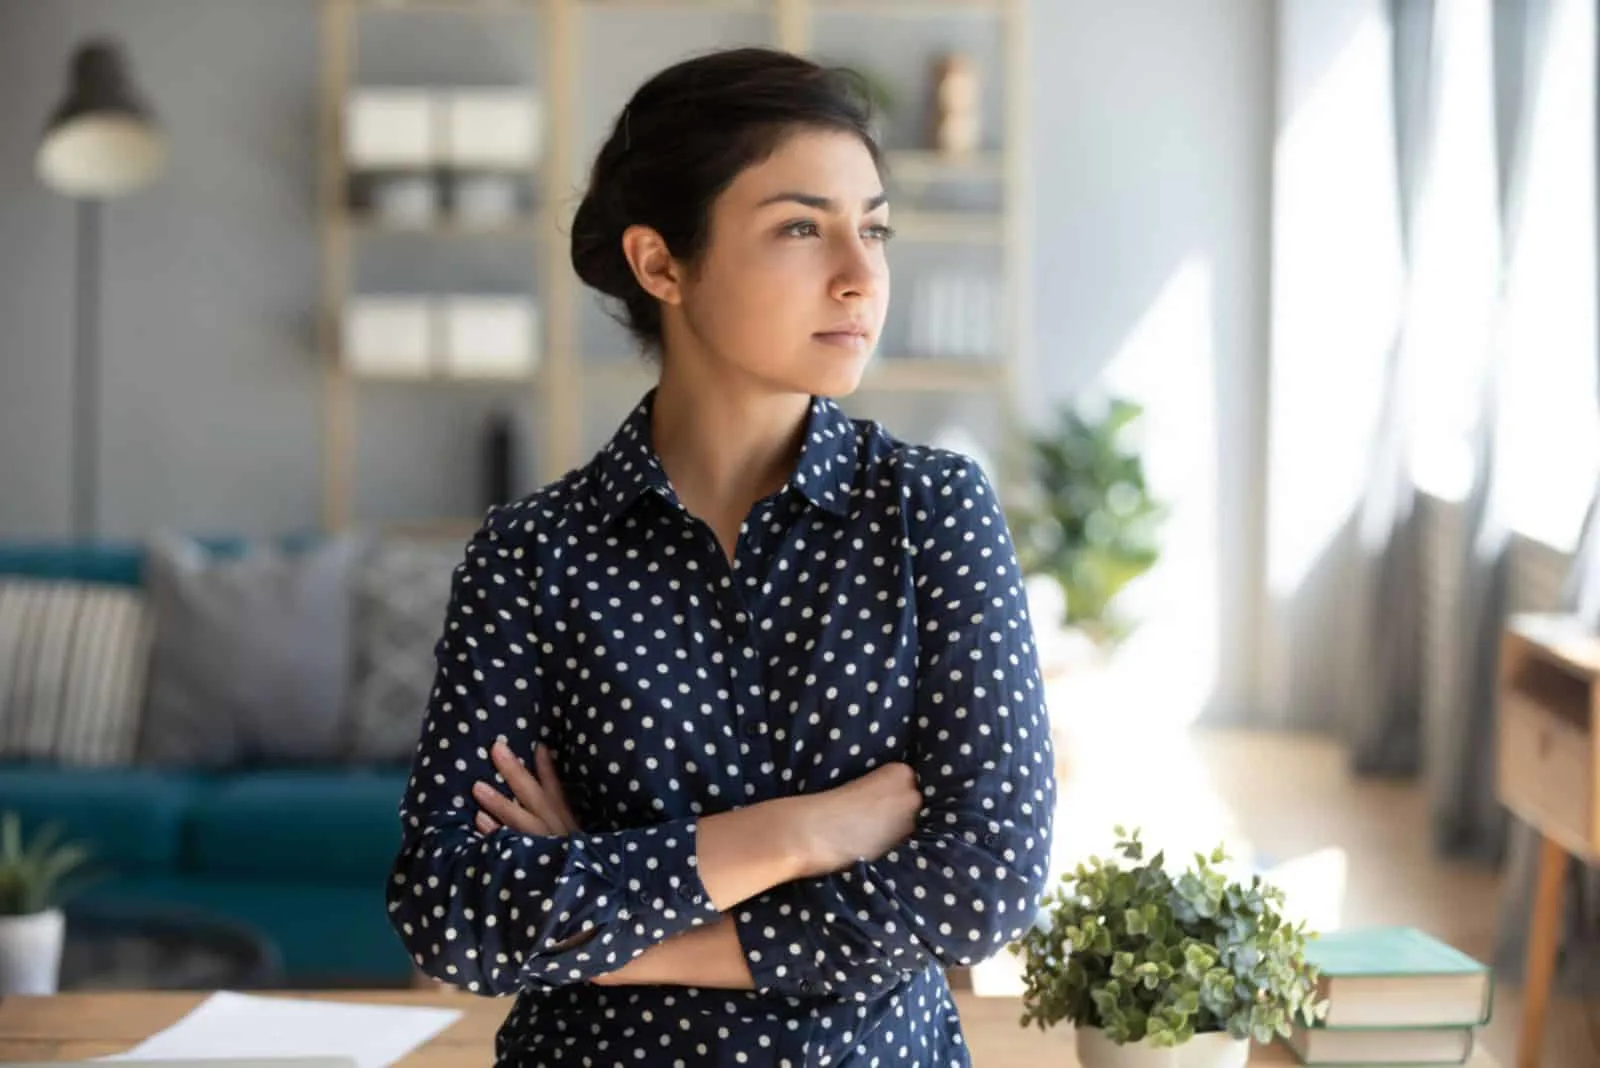 serious woman looking at distance at home